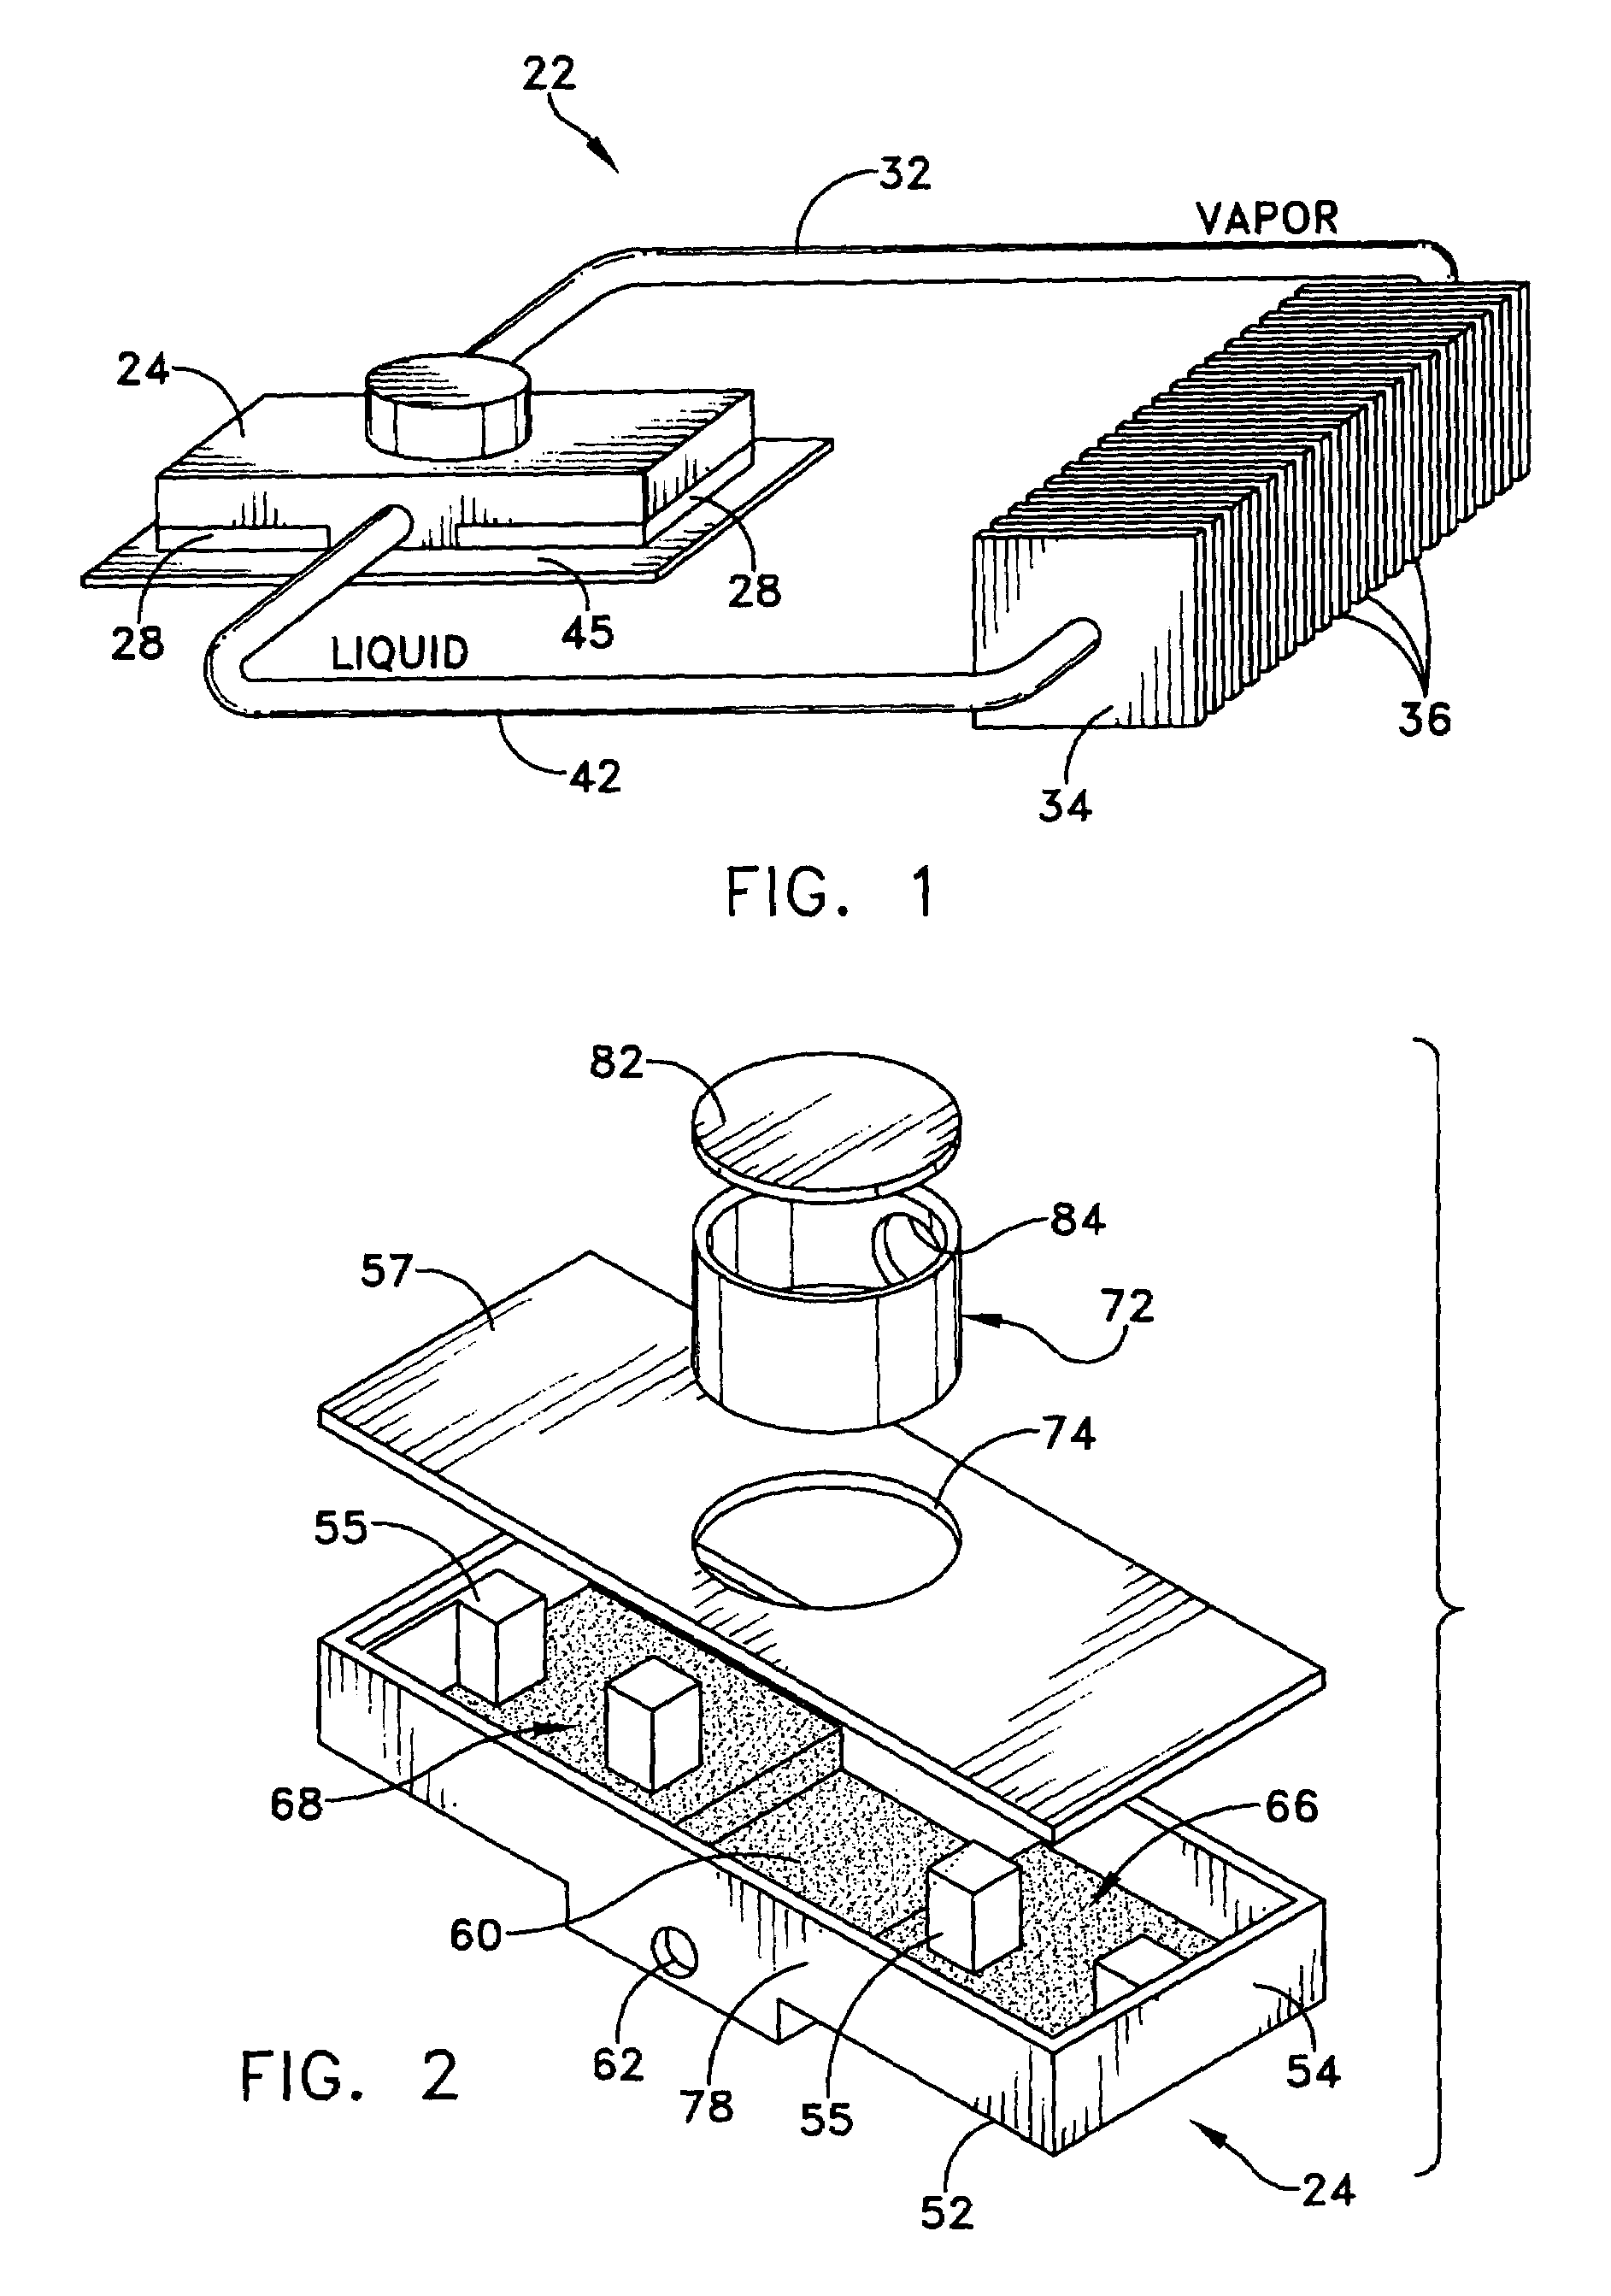 Fluid circuit heat transfer device for plural heat sources